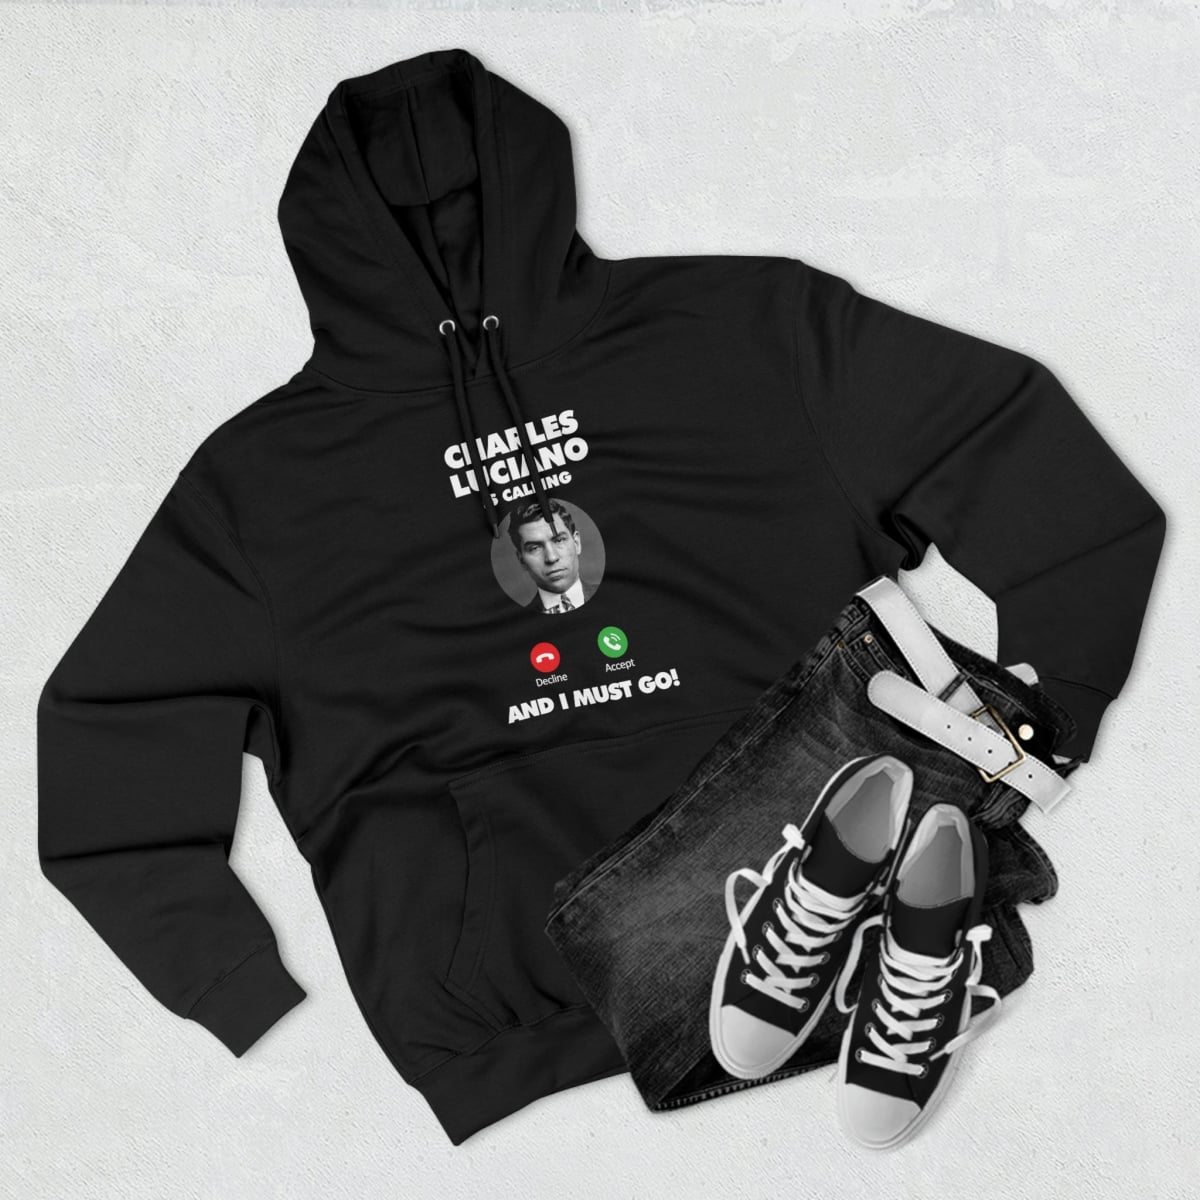 Charles Lucky Luciano is Calling Pullover Hoodie